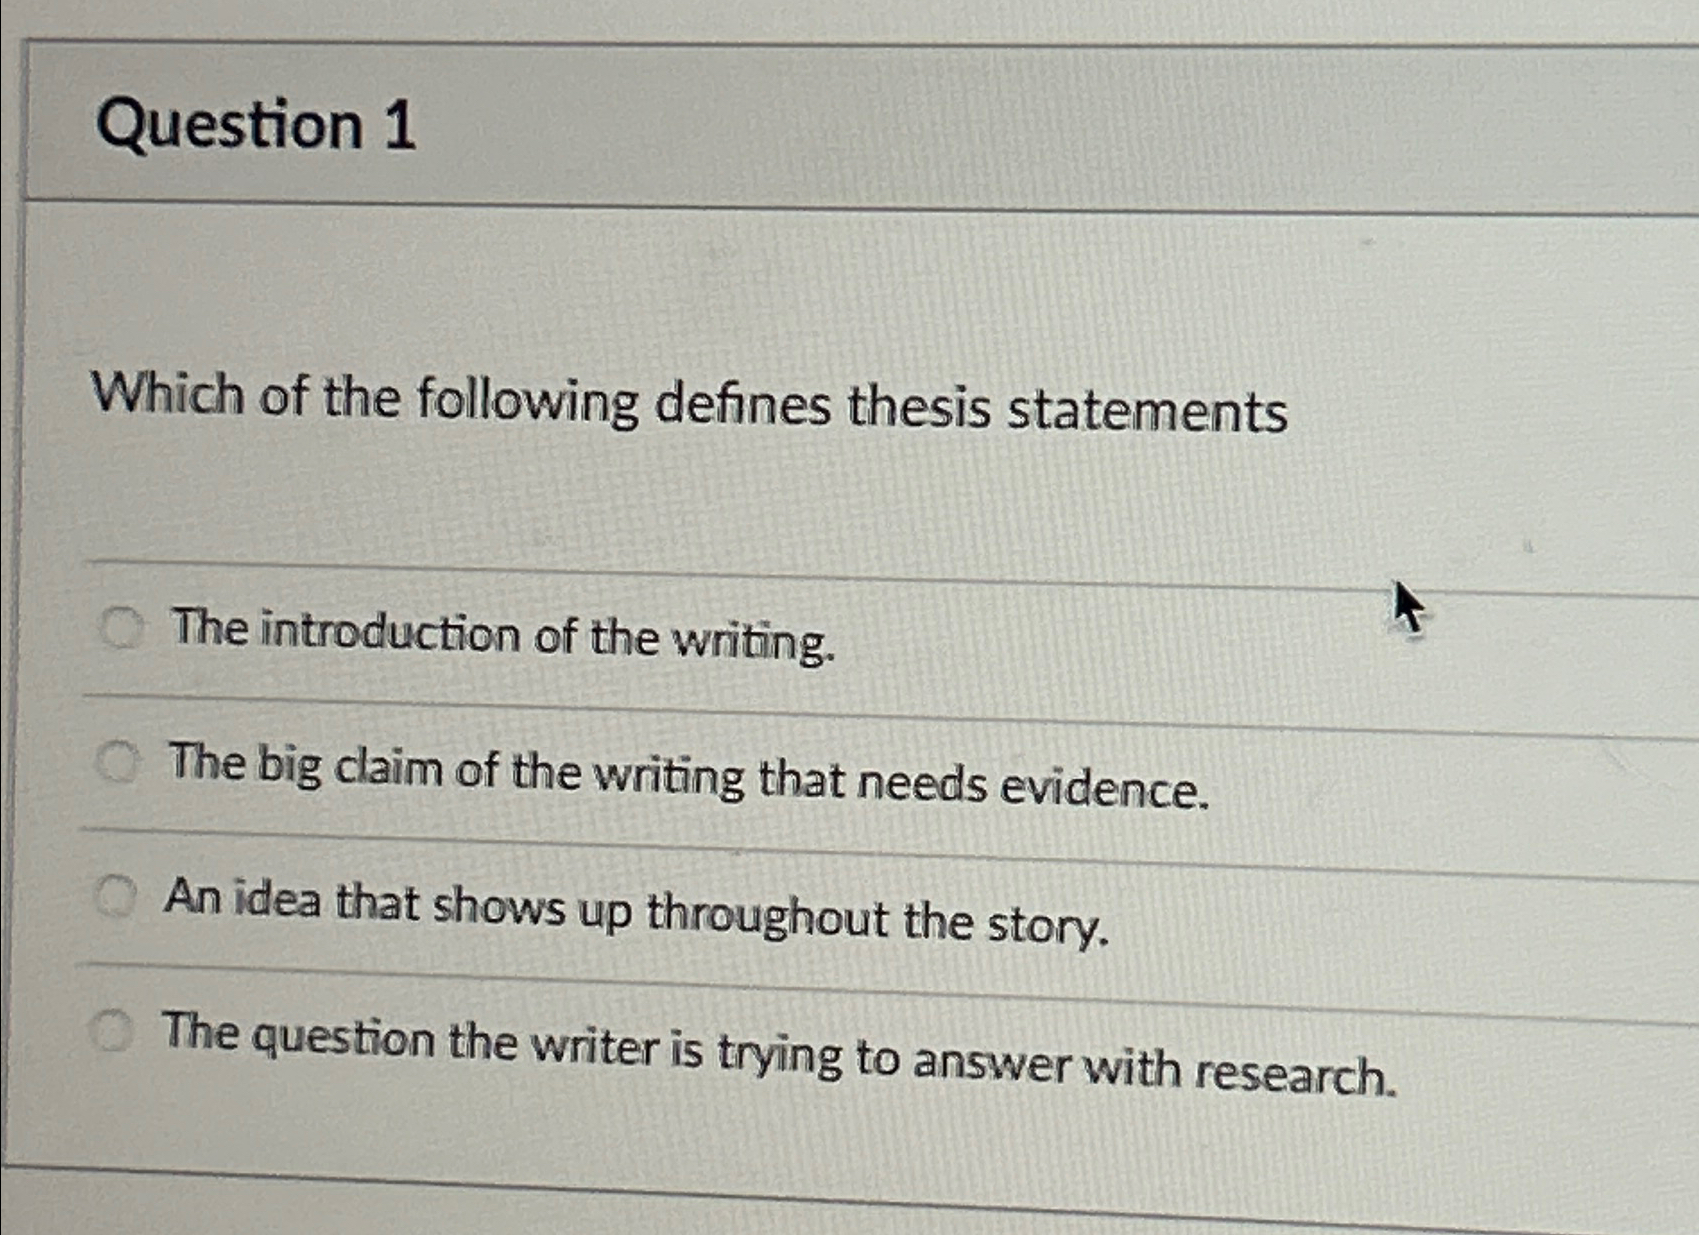 which of the following best defines thesis